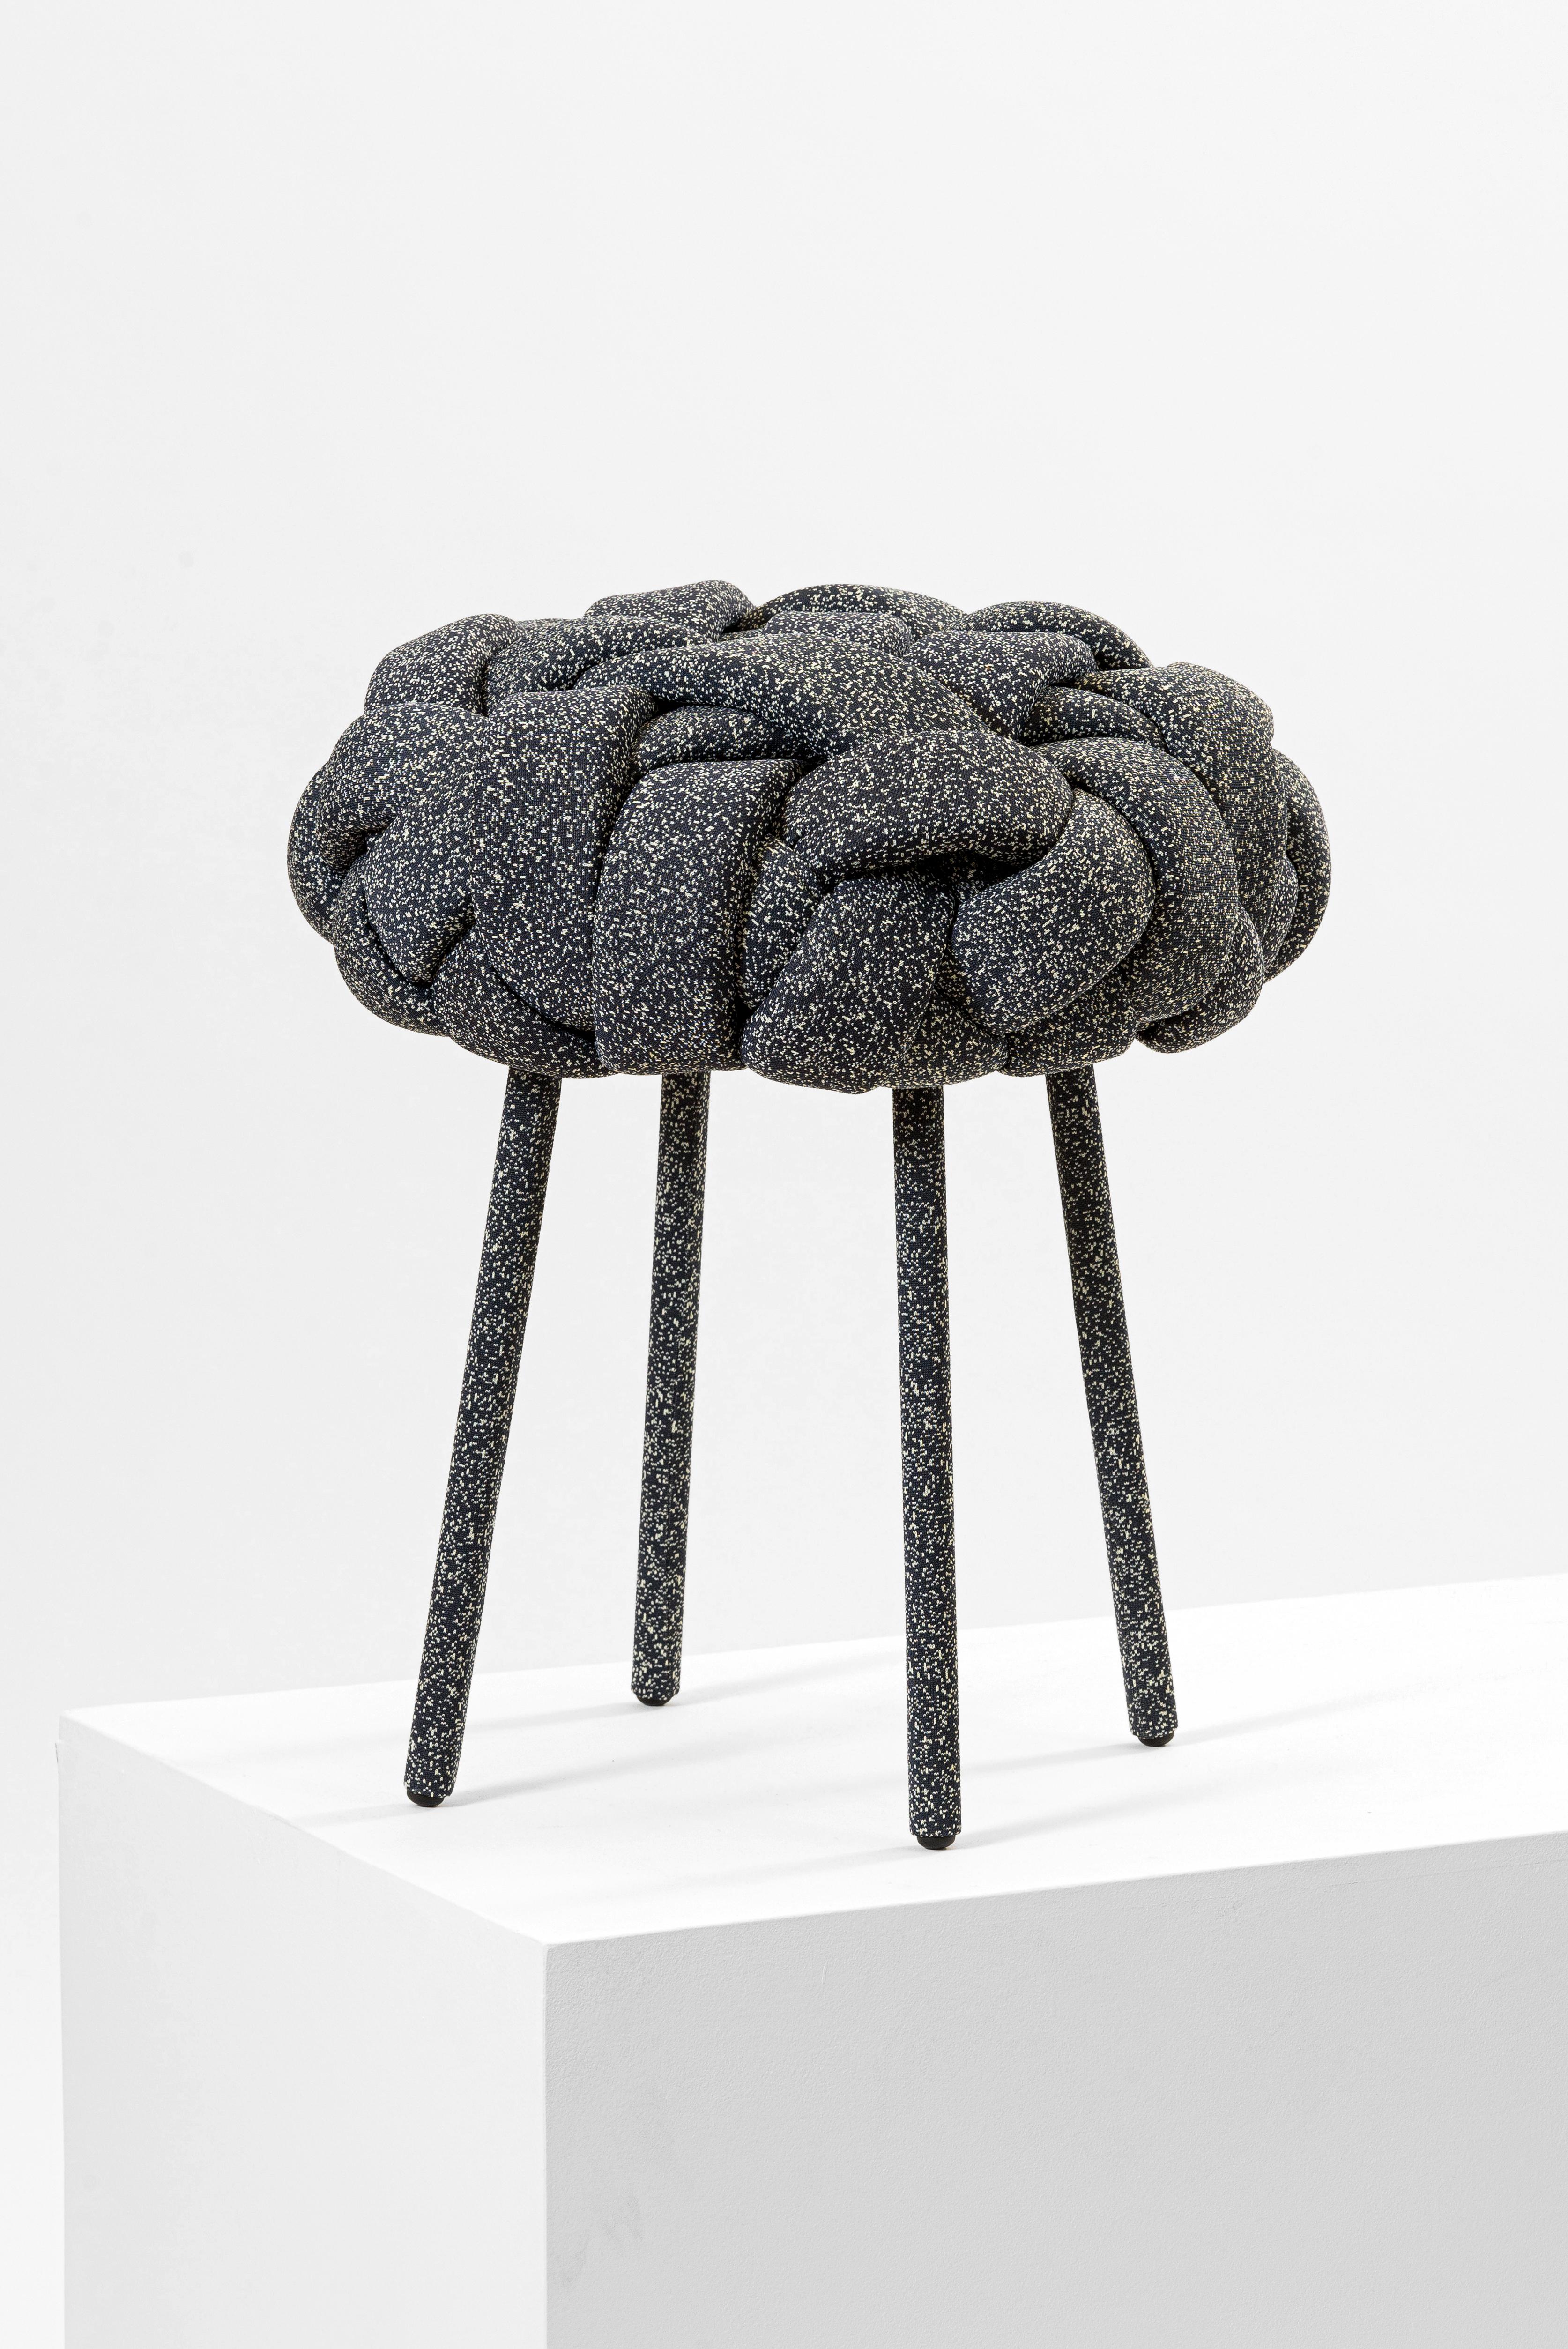 This contemporary stool is part of the cloud collection, which was created around the concept of trees. These contemporary stools and benches are made with cotton fabric and foam stripes, woven and stitched by hand. Each piece is unique, as the